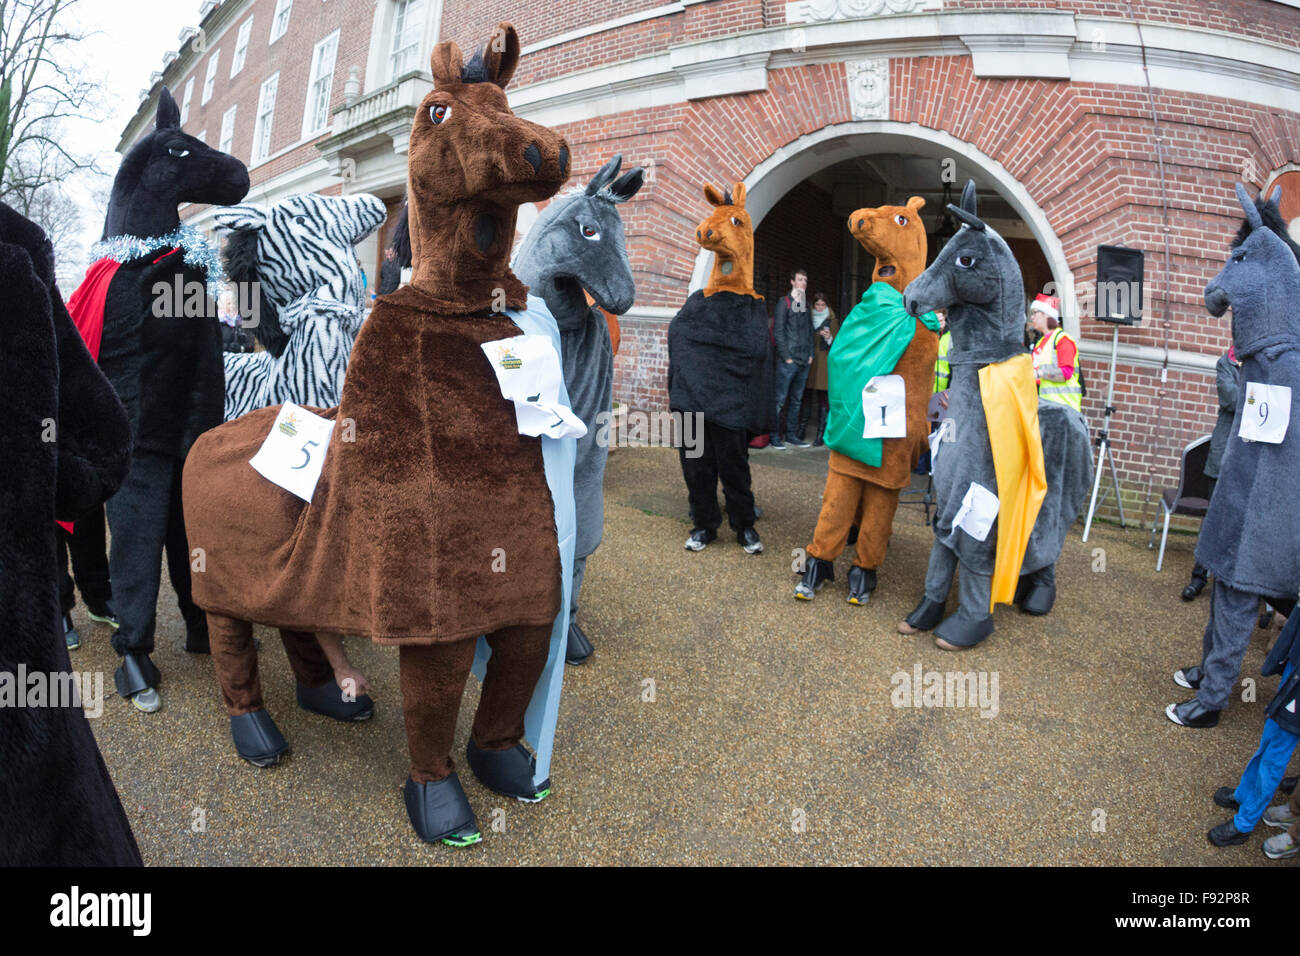 London, UK. 13 December 2015. The London Pantomime Horse Race, now in ...